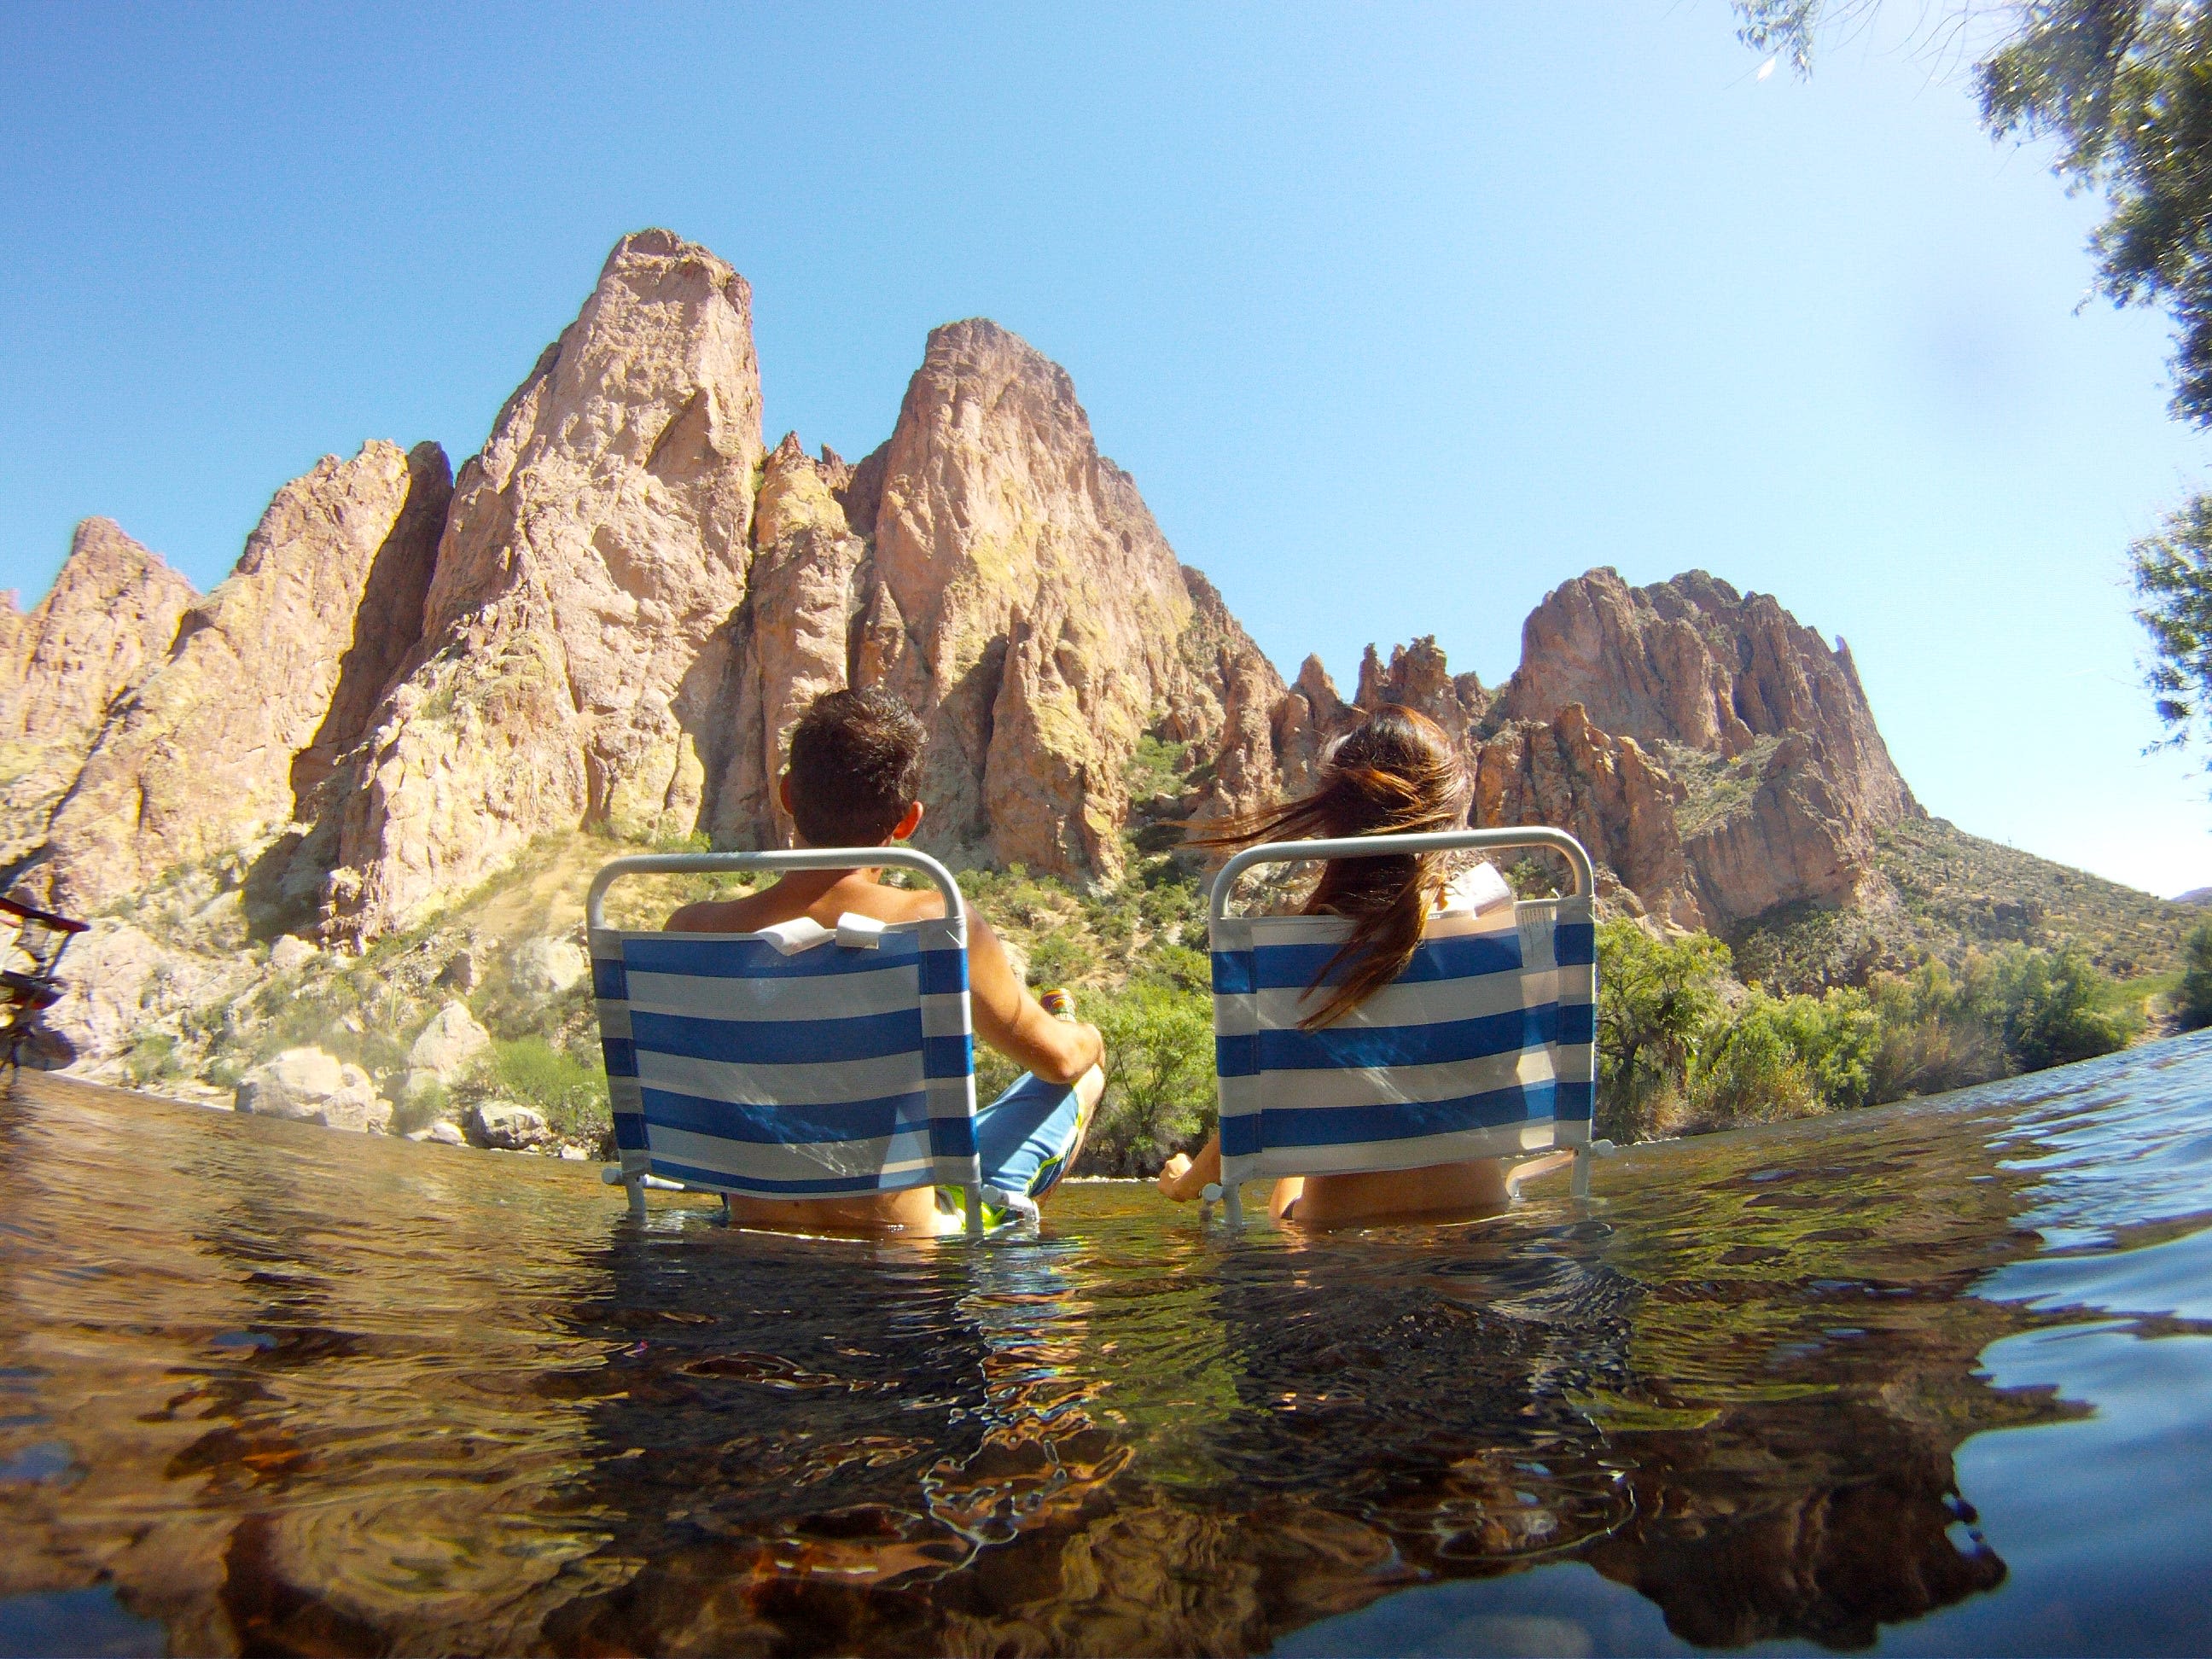 From beaches to water parks, these fun summer activities will help you beat Arizona's heat